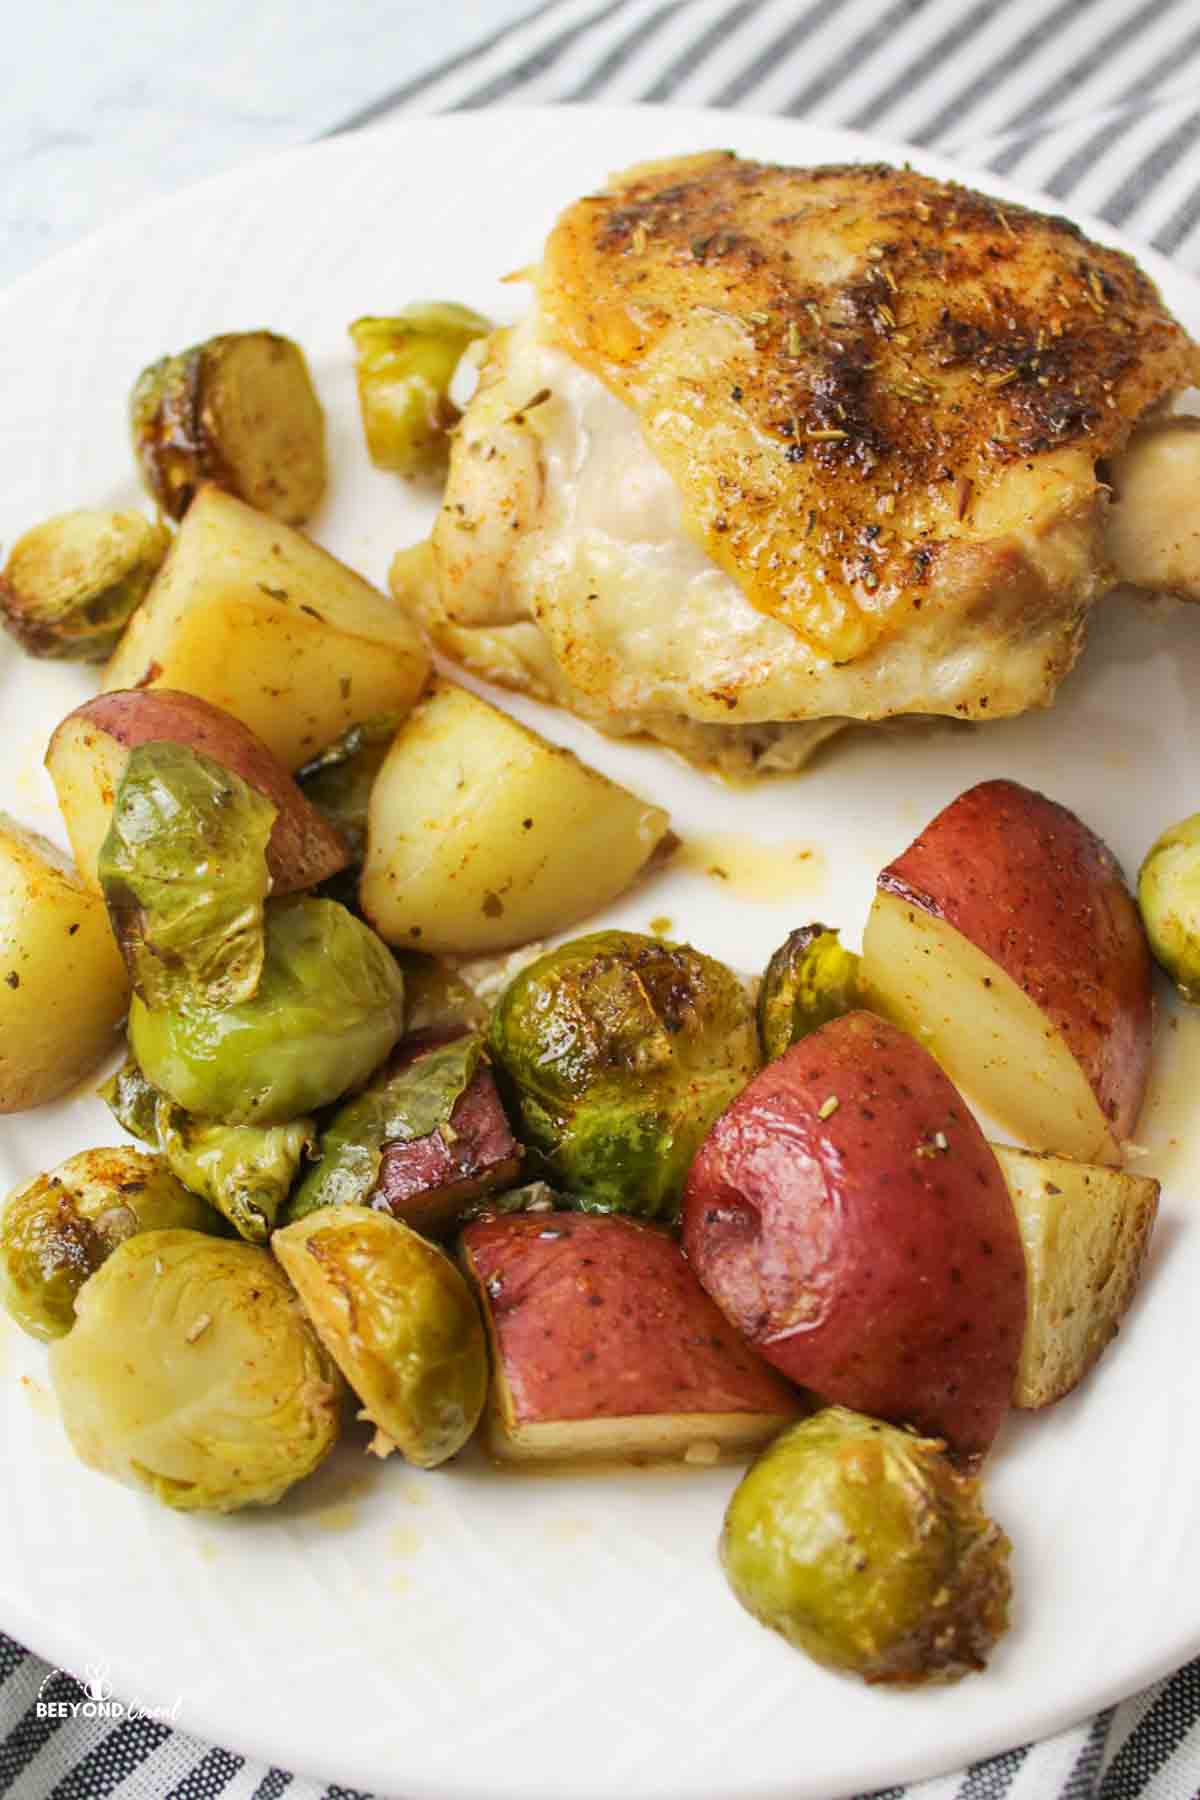 chicken thigh, brussel sprouts, and red potatoes on a white dinner plate